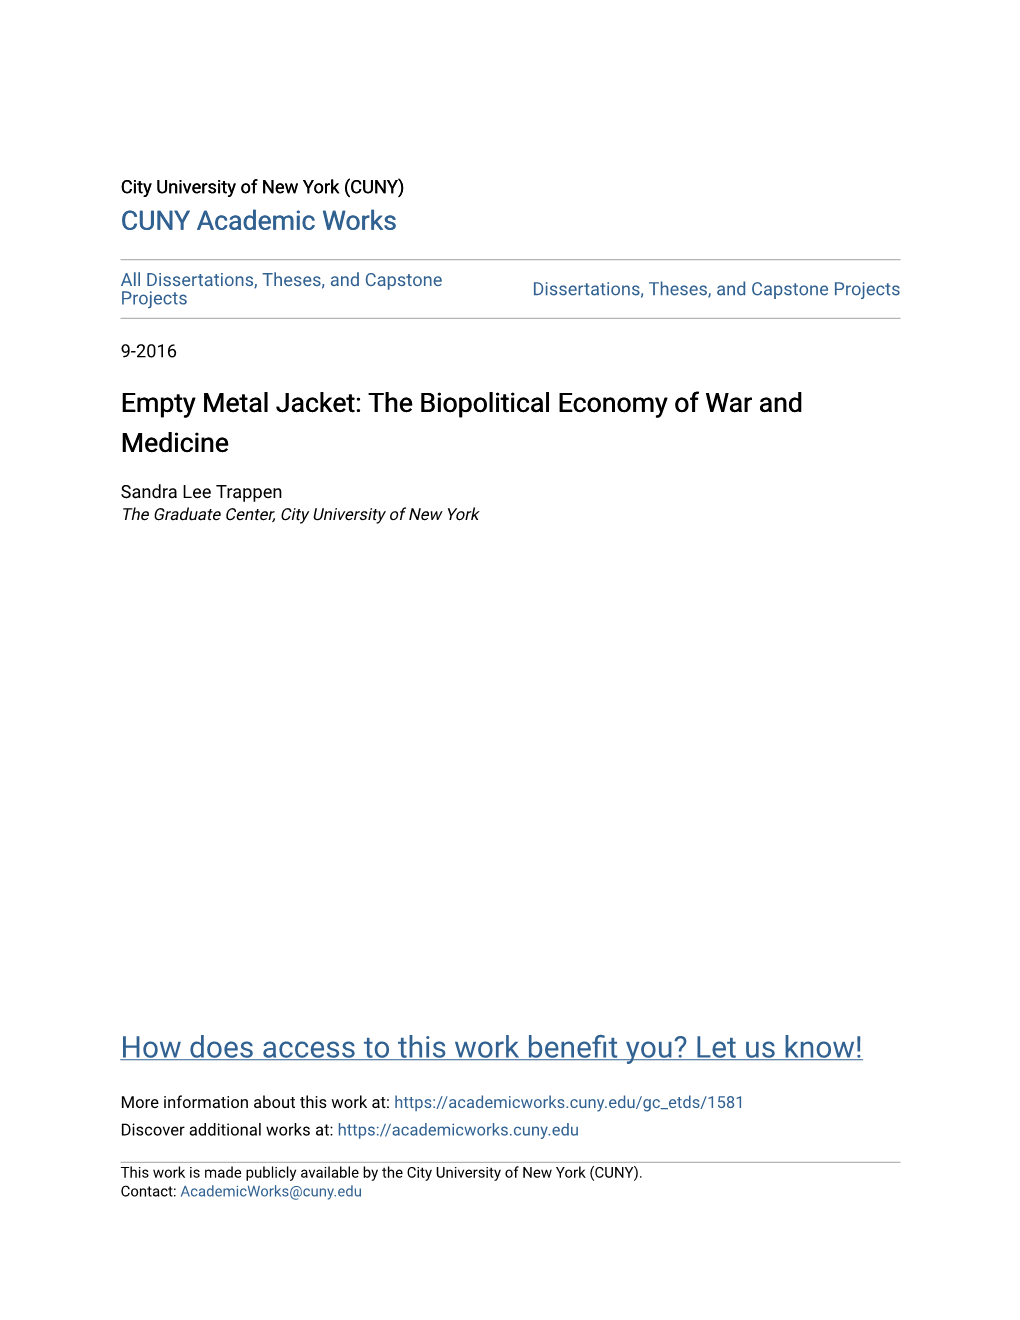 Empty Metal Jacket: the Biopolitical Economy of War and Medicine